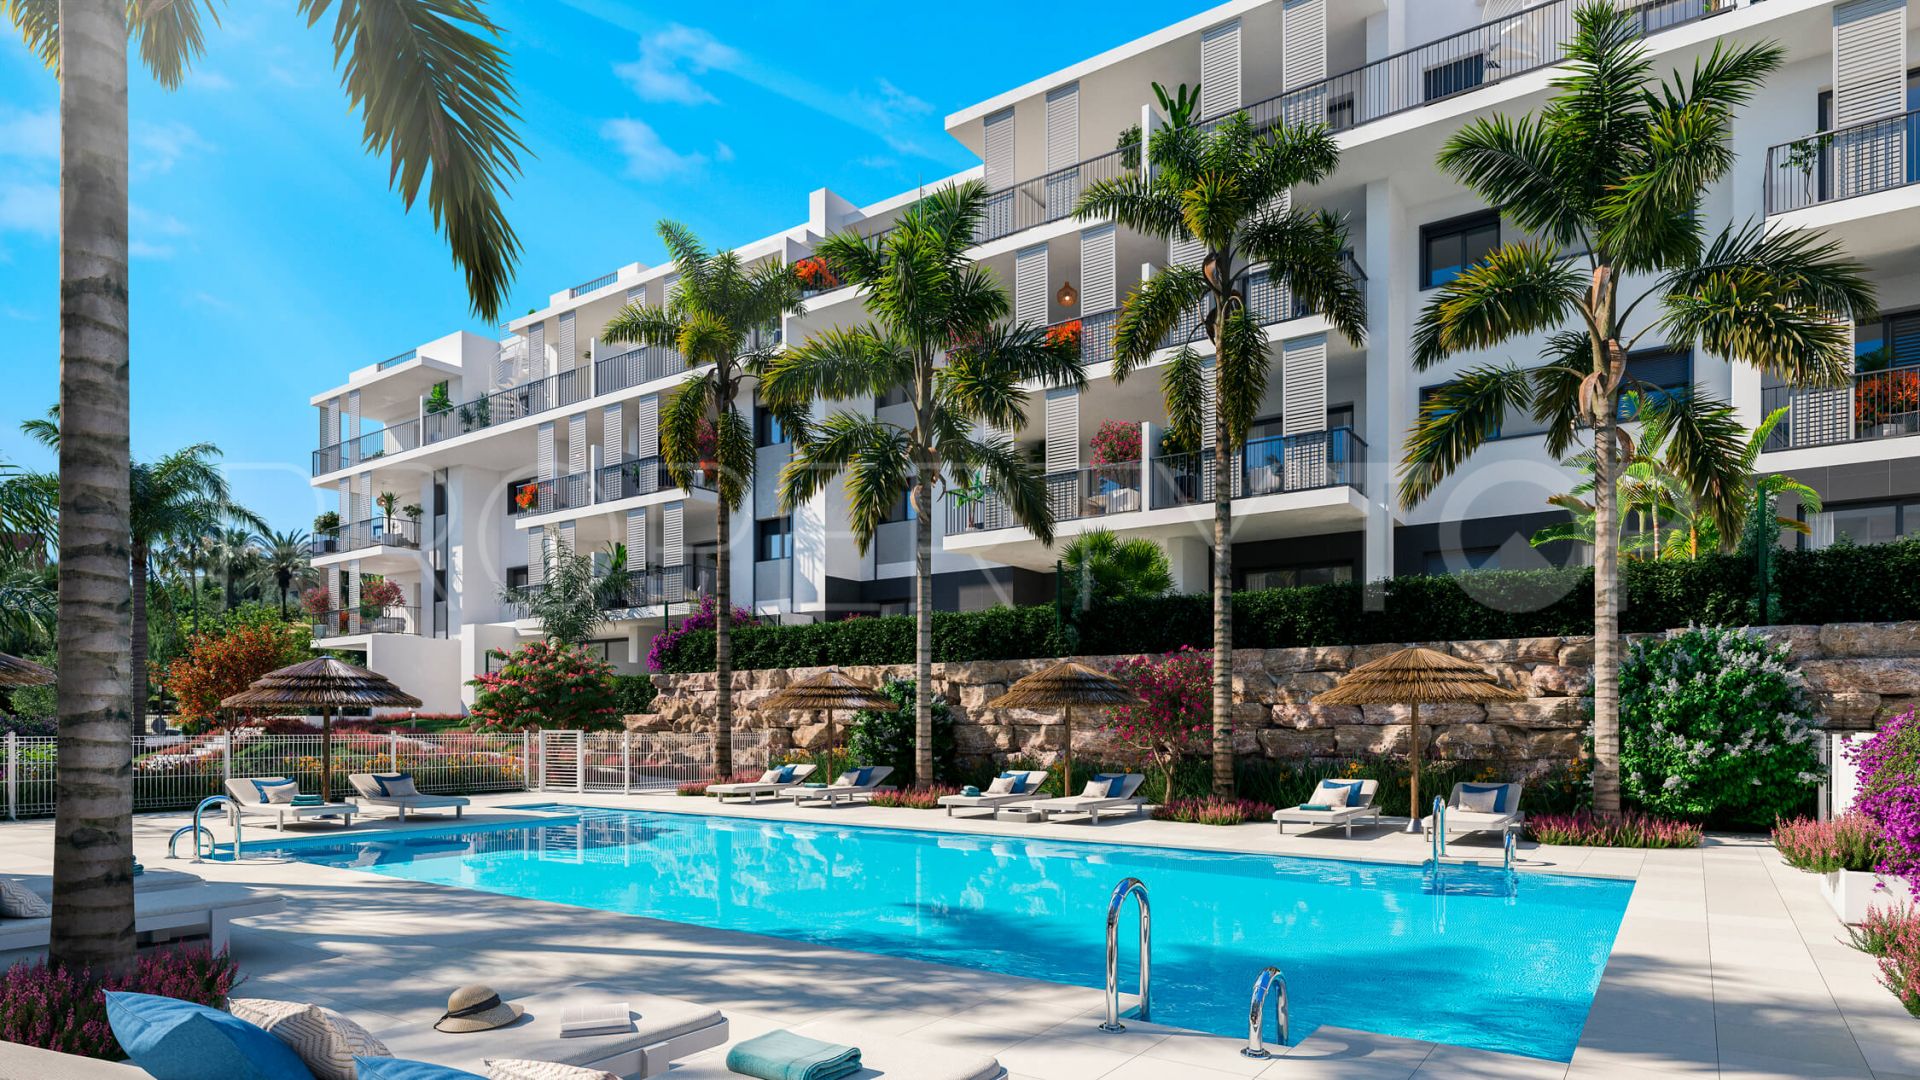 Apartment for sale in Estepona with 2 bedrooms